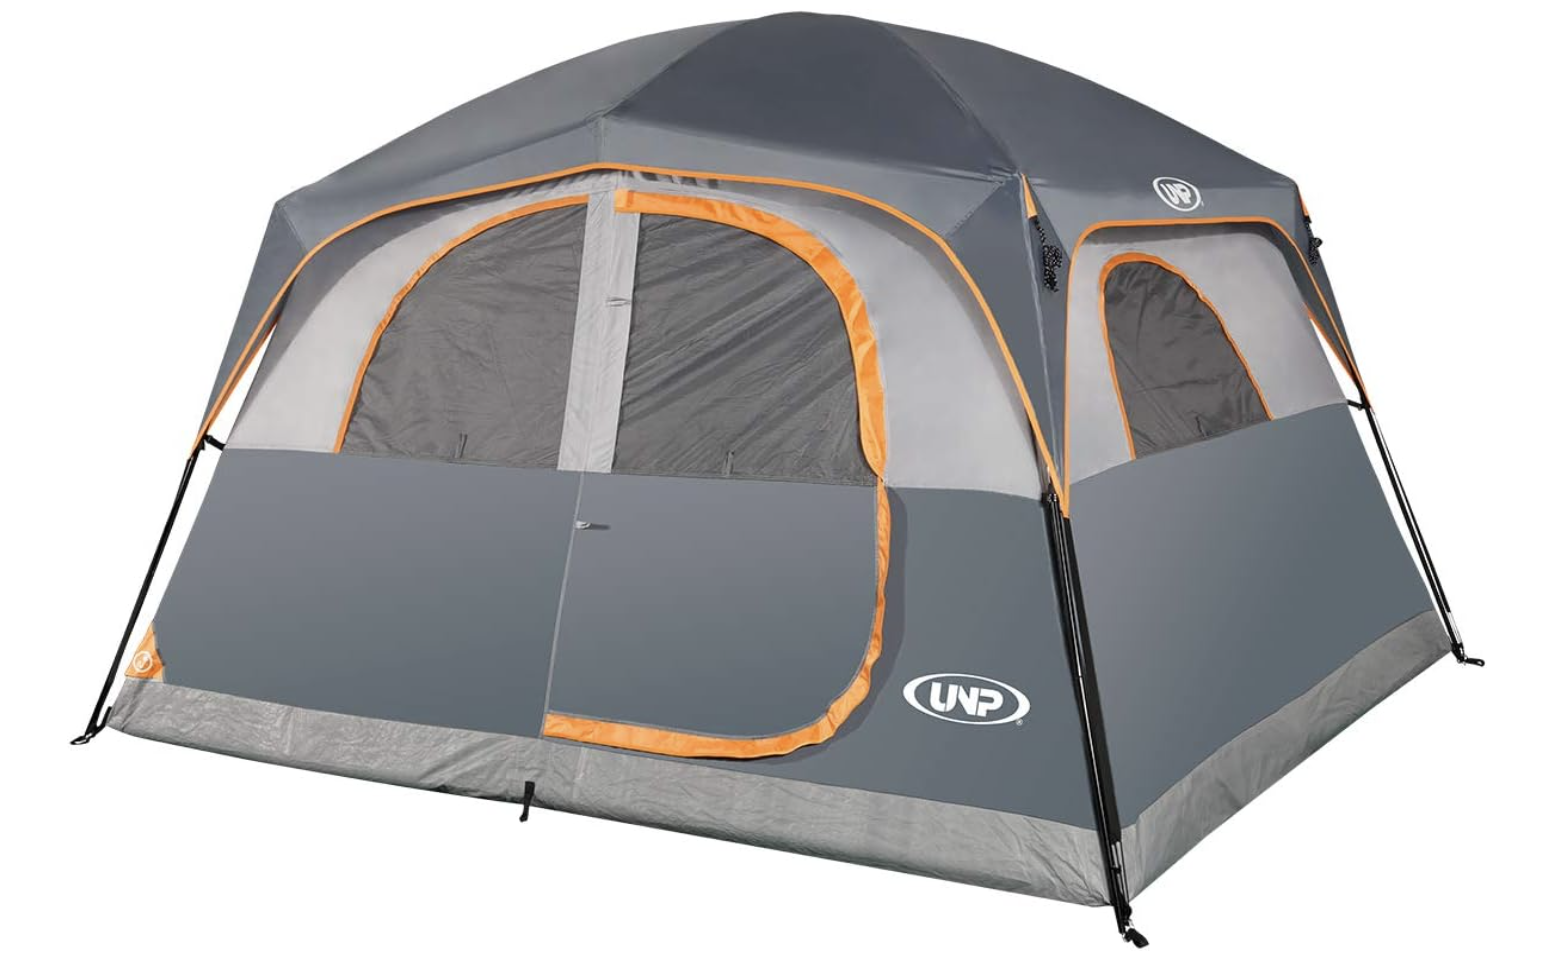 6 person all weather tent